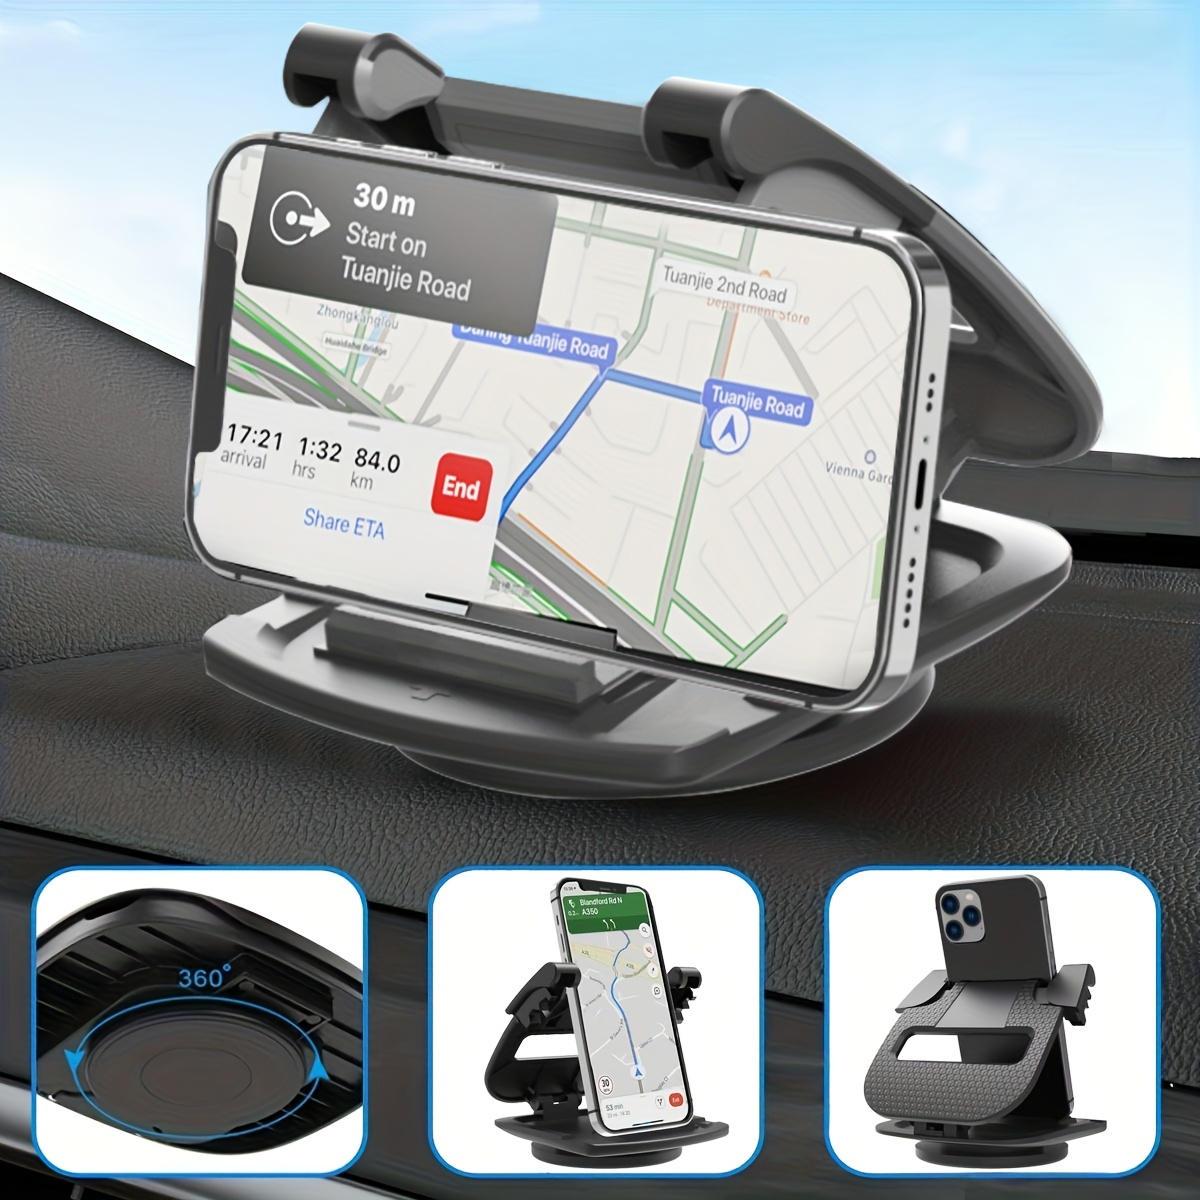 

Cell Phone Holder For Car, Vertical Horizontal Car Phone Mount With 360° Rotation Dashboard Cradle For Iphone, Samsung Galaxy Android Smartphones